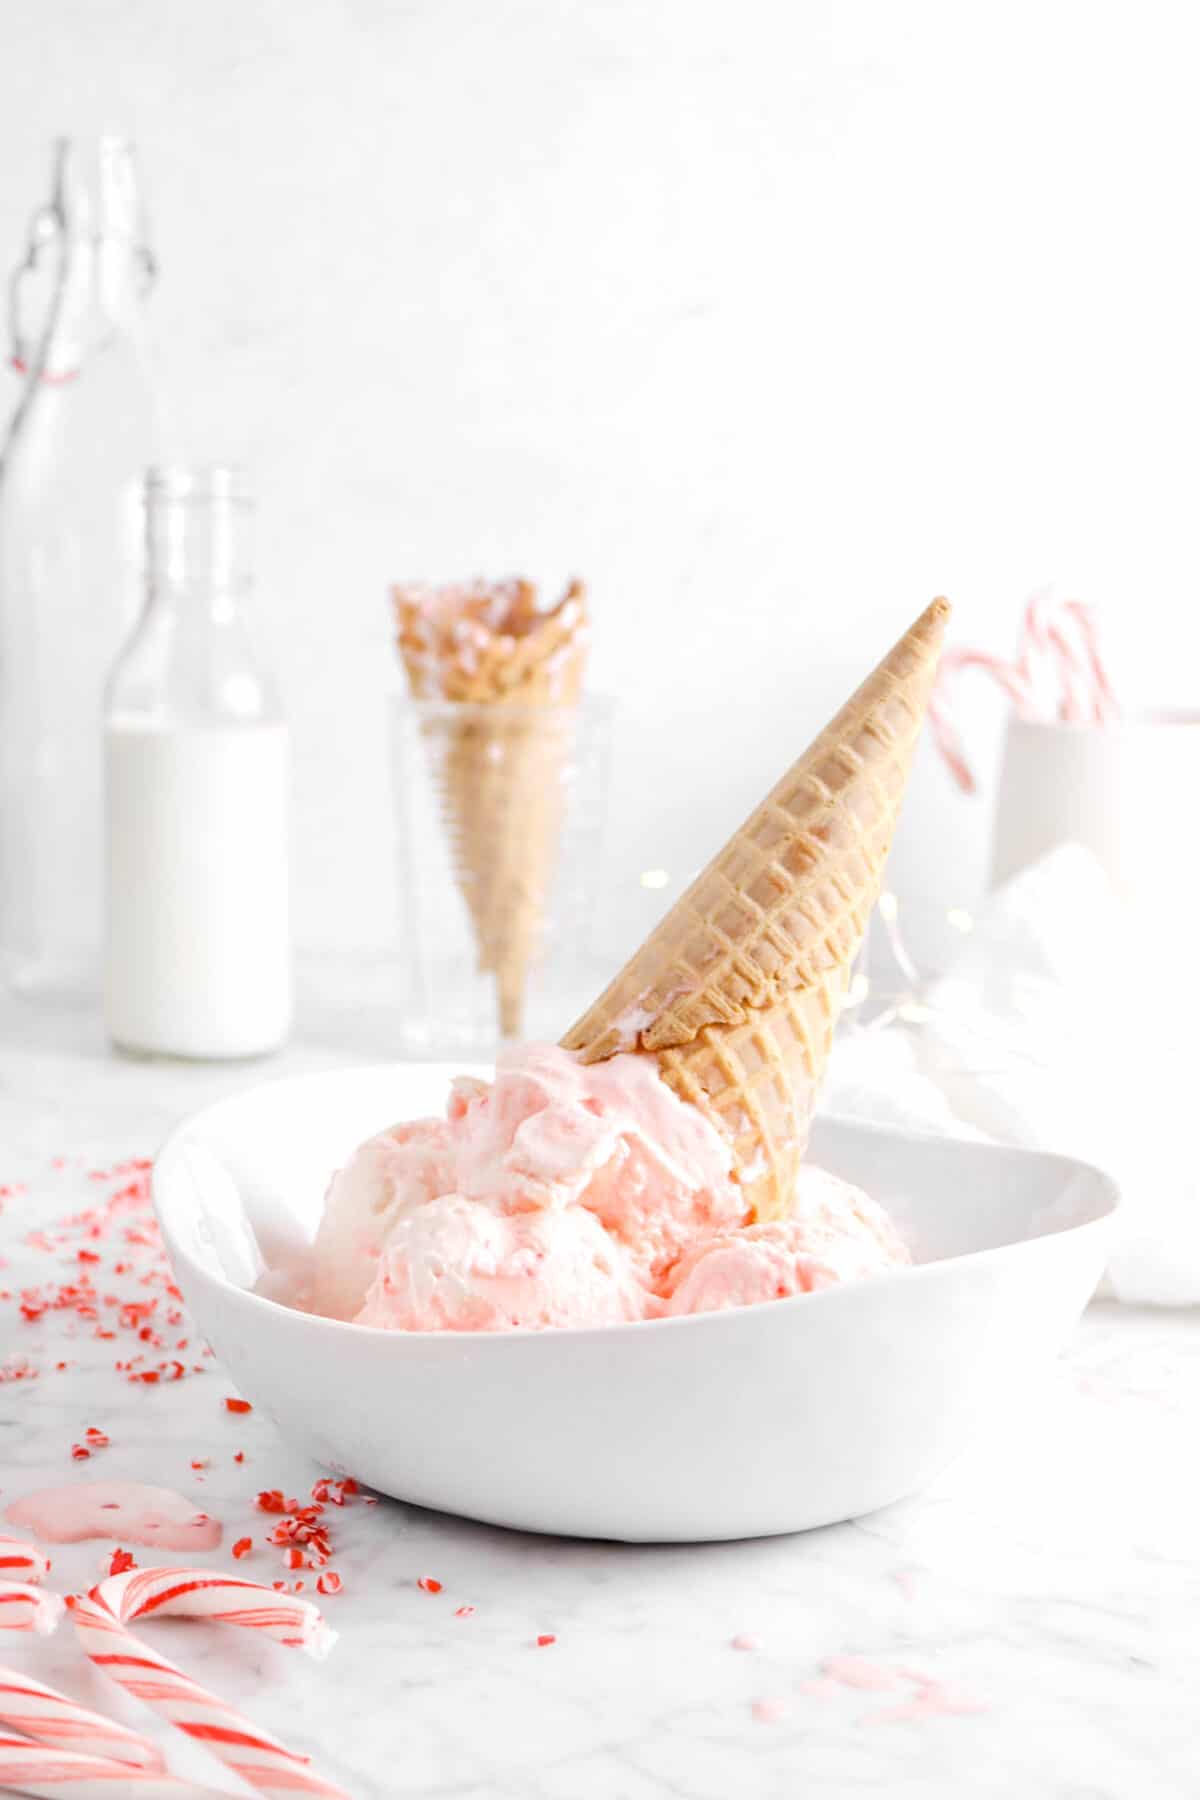 peppermint ice cream in white bowl with a cone, crushed peppermint, glass of milk, and more cones behind